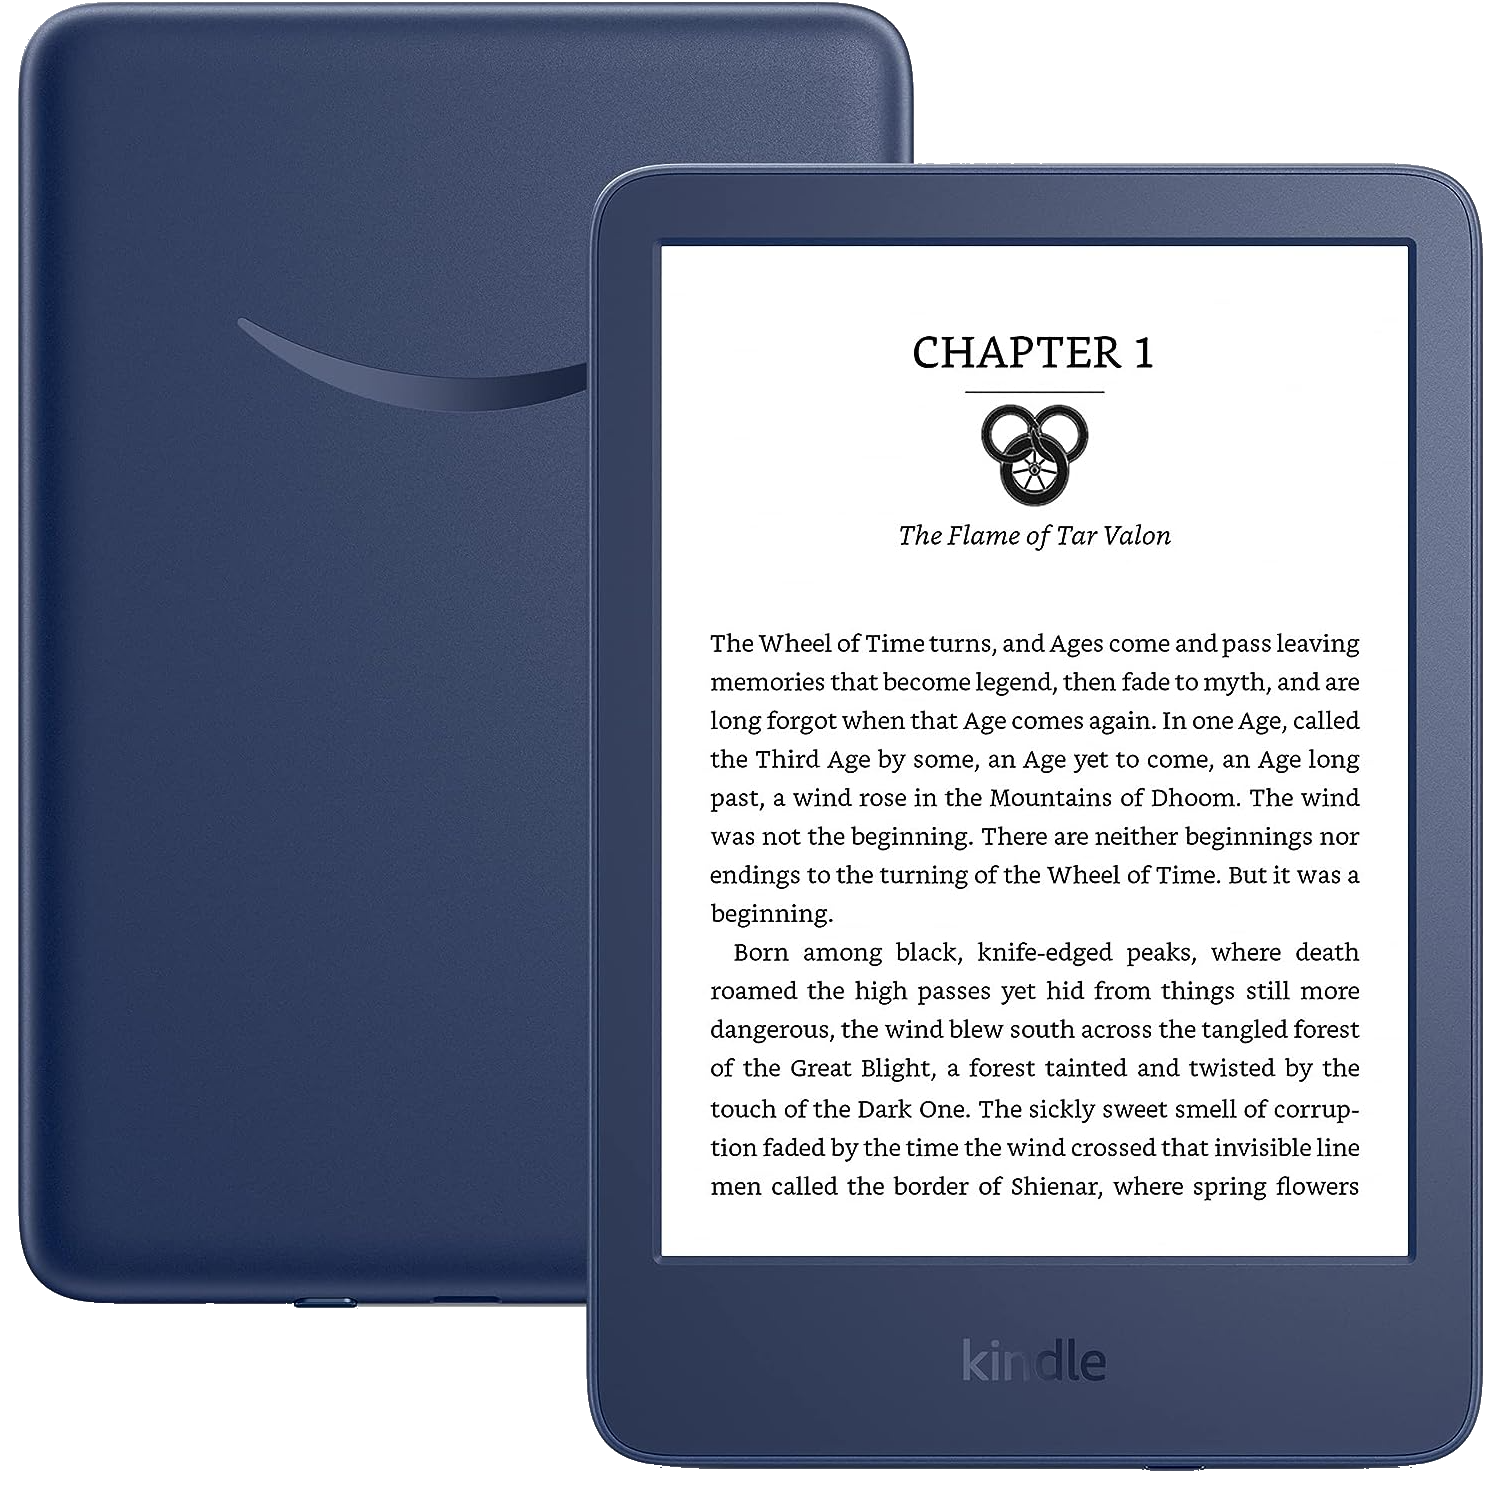 PocketBook InkPad Color 3 e-reader review - Great for comic fans thanks to  vibrant colors -  Reviews